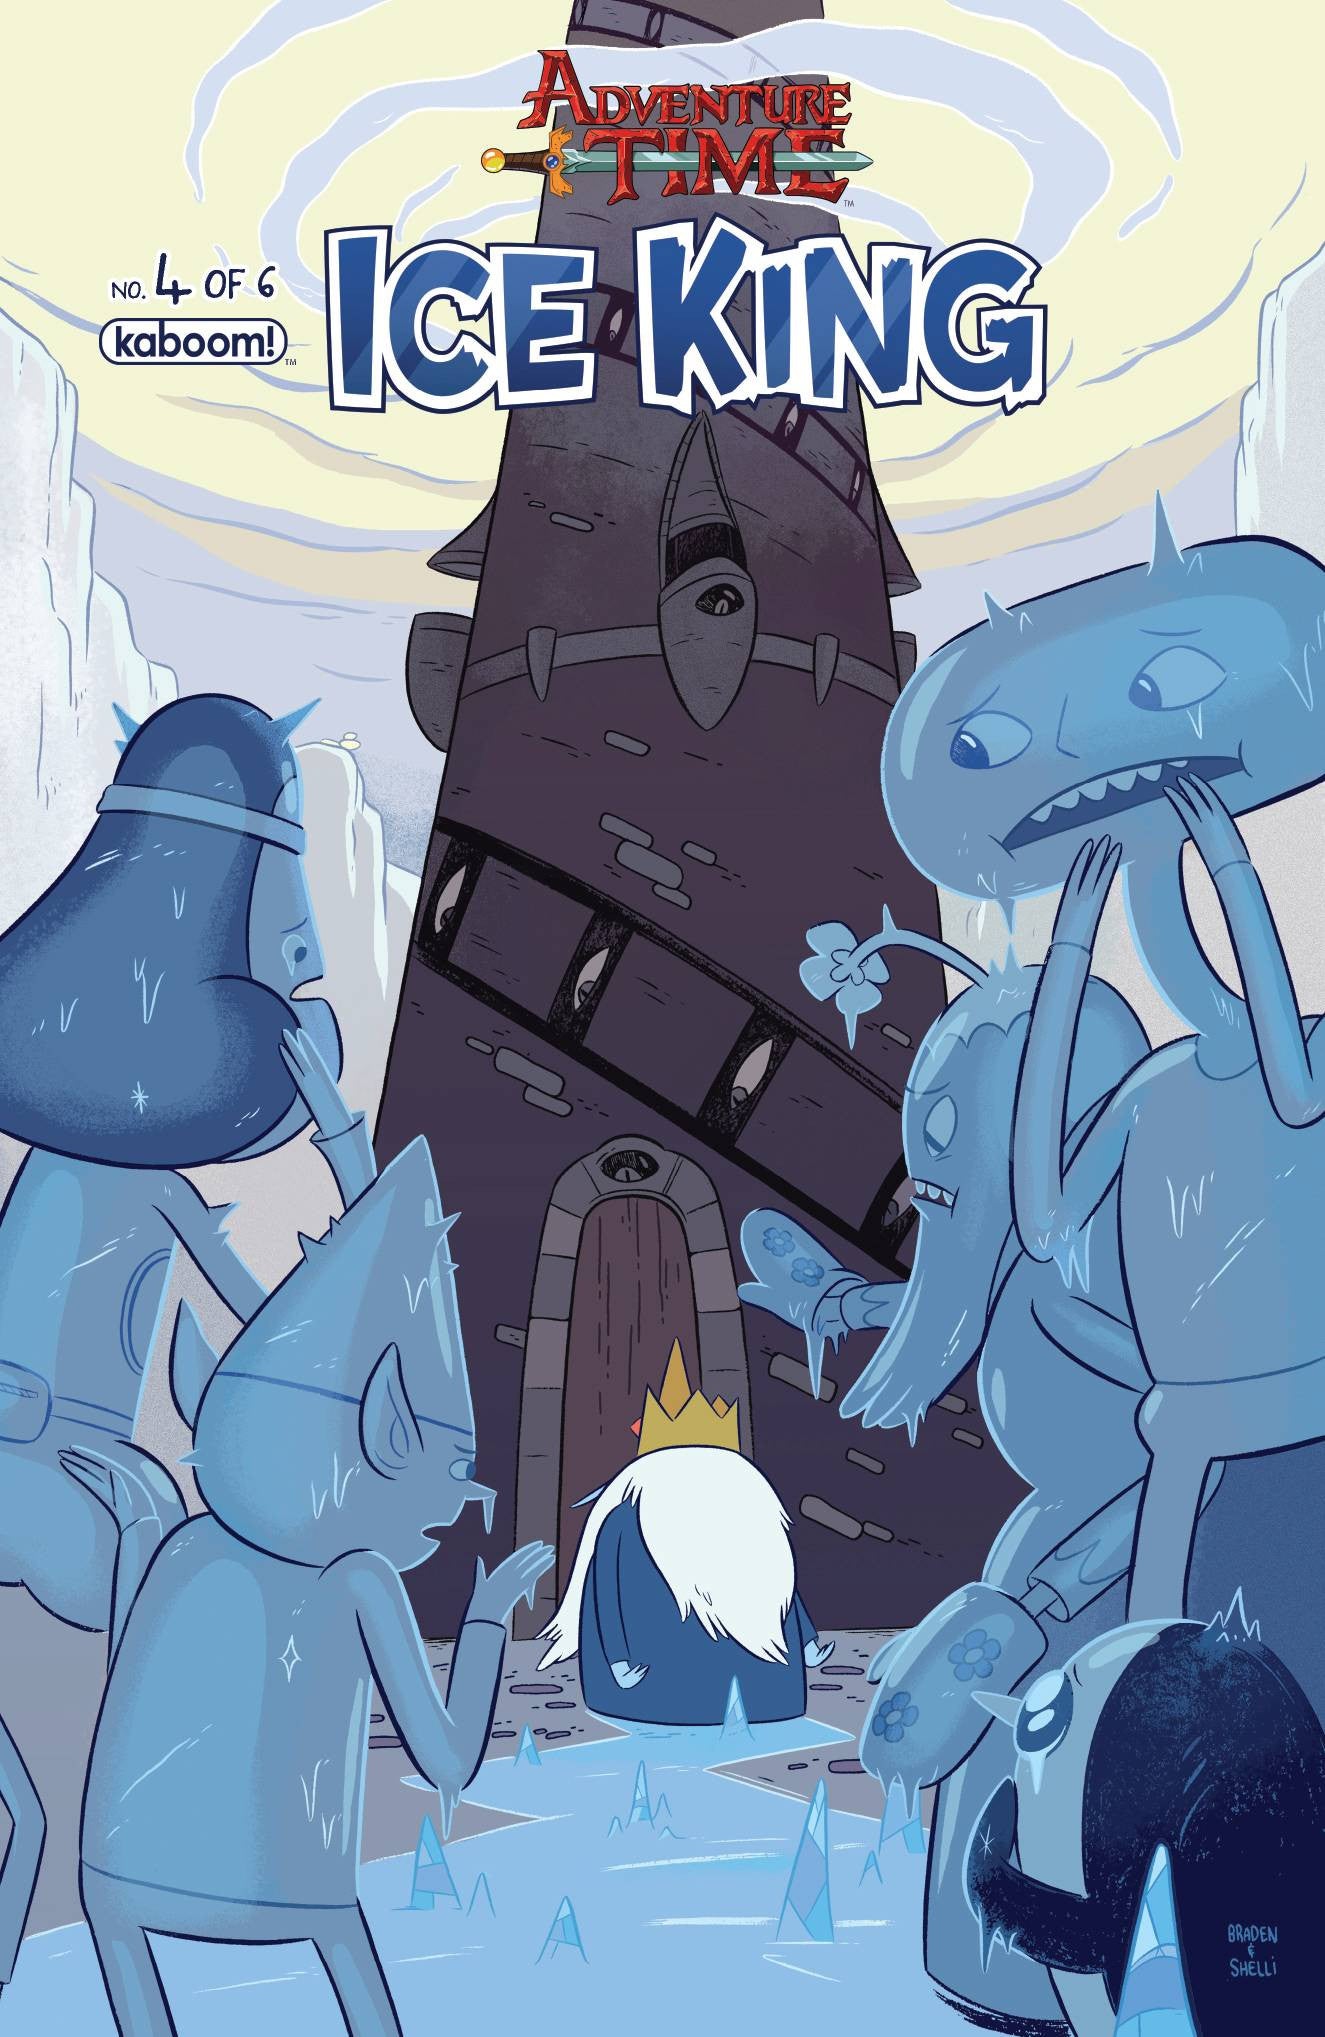 ADVENTURE TIME ICE KING #4 COVER